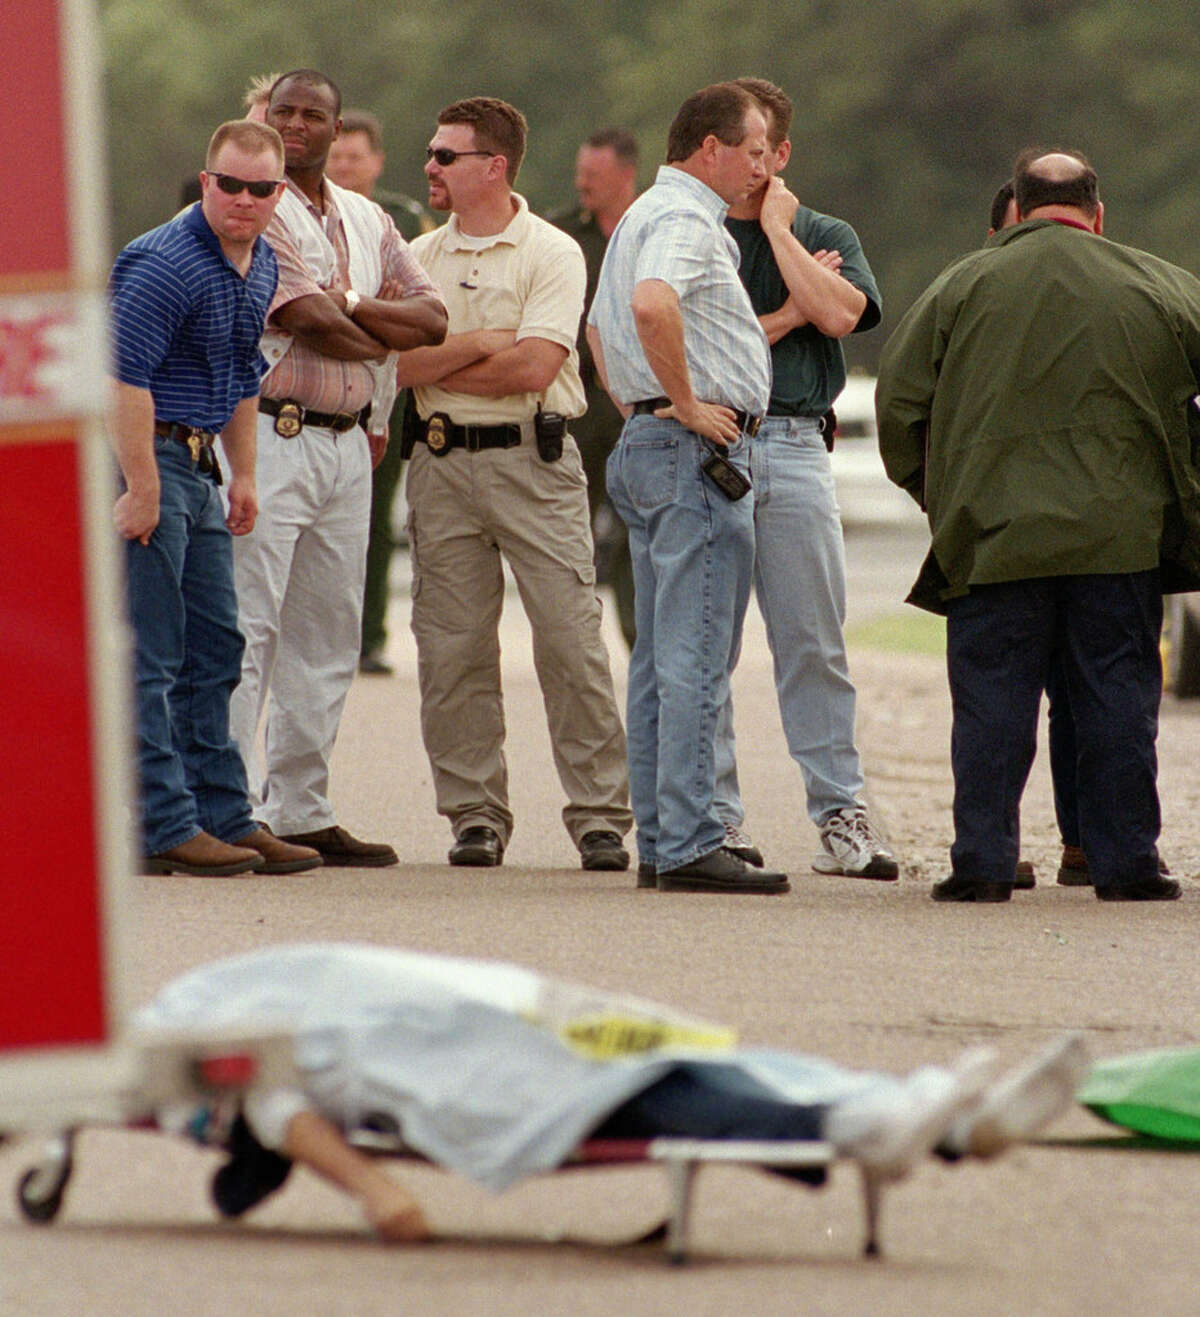 5/14/2003--A body lies draped at a scene where 16 people were found dead early Wednesday in and around the trailer of an 18-wheeler truck left at a truck stop near Victoria, TX. Sheriff's deputies found the bodies about 2 a.m. when they answered a reported disturbance inside a trailer at the Speedy Stop truck stop, six miles south of Victoria, TX on US 77 at Fleming Prarie Rd. Photo by Steve Ueckert / Chronicle